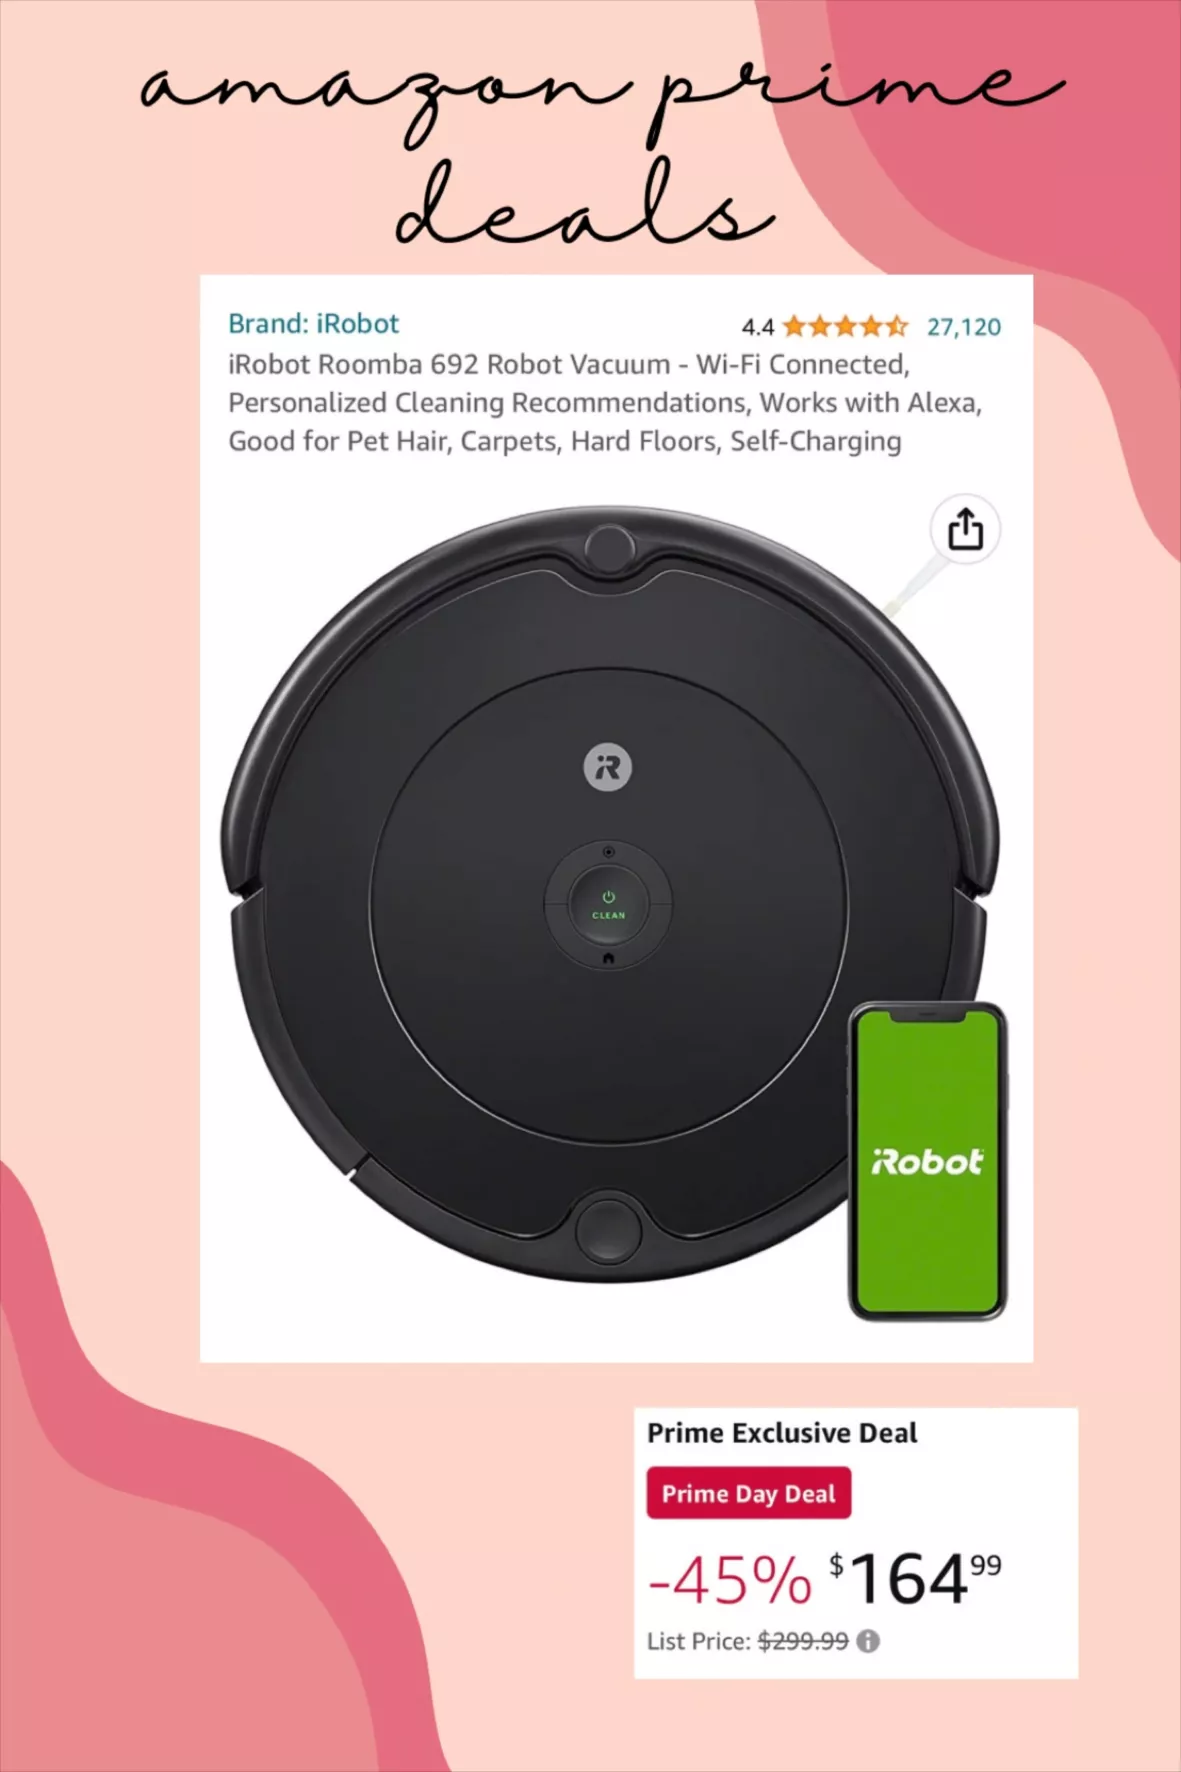  iRobot Roomba 692 Robot Vacuum - Wi-Fi Connectivity,  Personalized Cleaning Recommendations, Works with Alexa, Good for Pet Hair,  Carpets, Hard Floors, Self-Charging